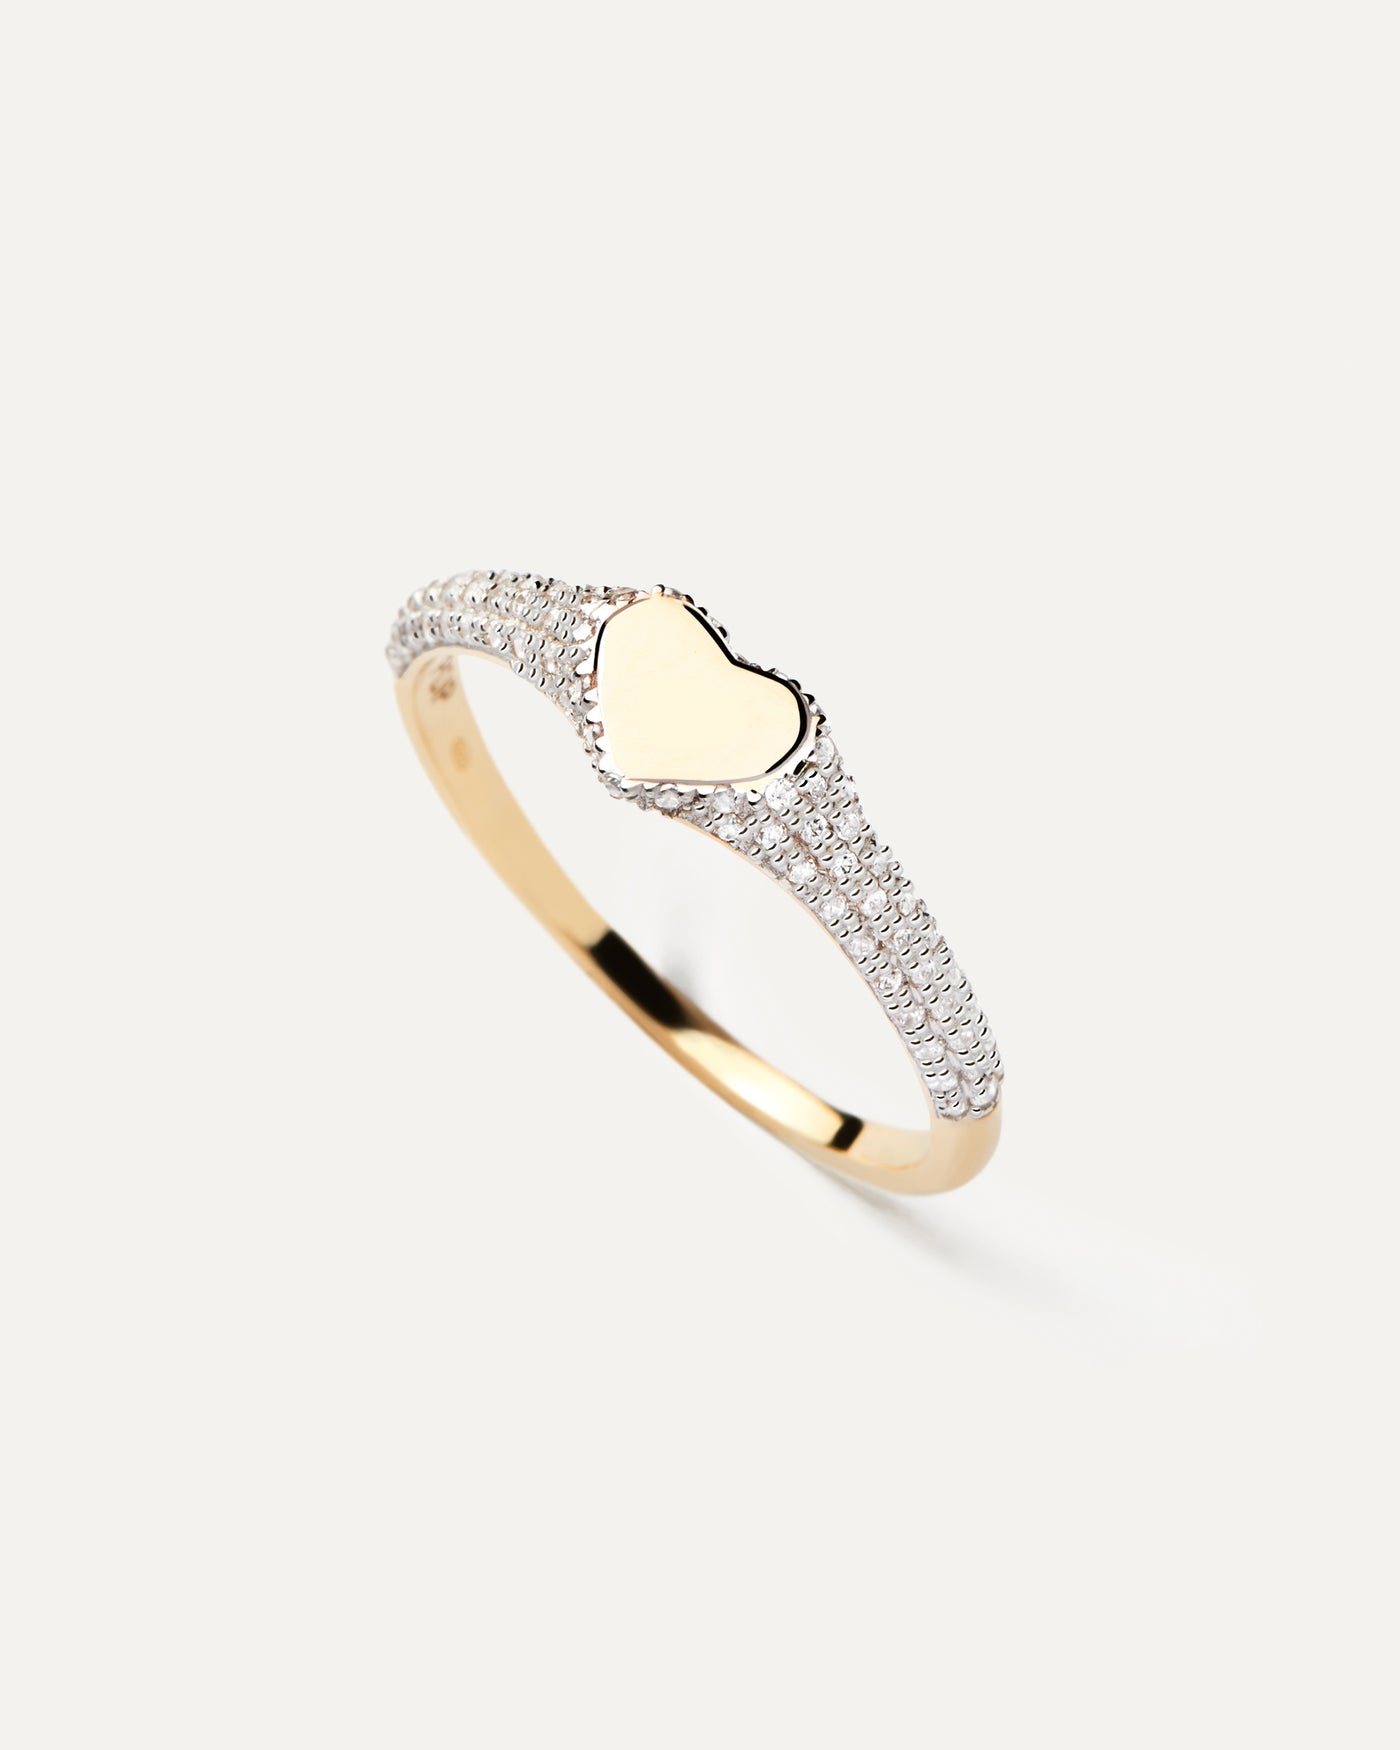 2023 Selection | Diamonds and Gold Heart Stamp Ring. Heart-shaped signet ring in solid yellow gold set with 76 pavé diamonds of 0.23 carats. Get the latest arrival from PDPAOLA. Place your order safely and get this Best Seller. Free Shipping.